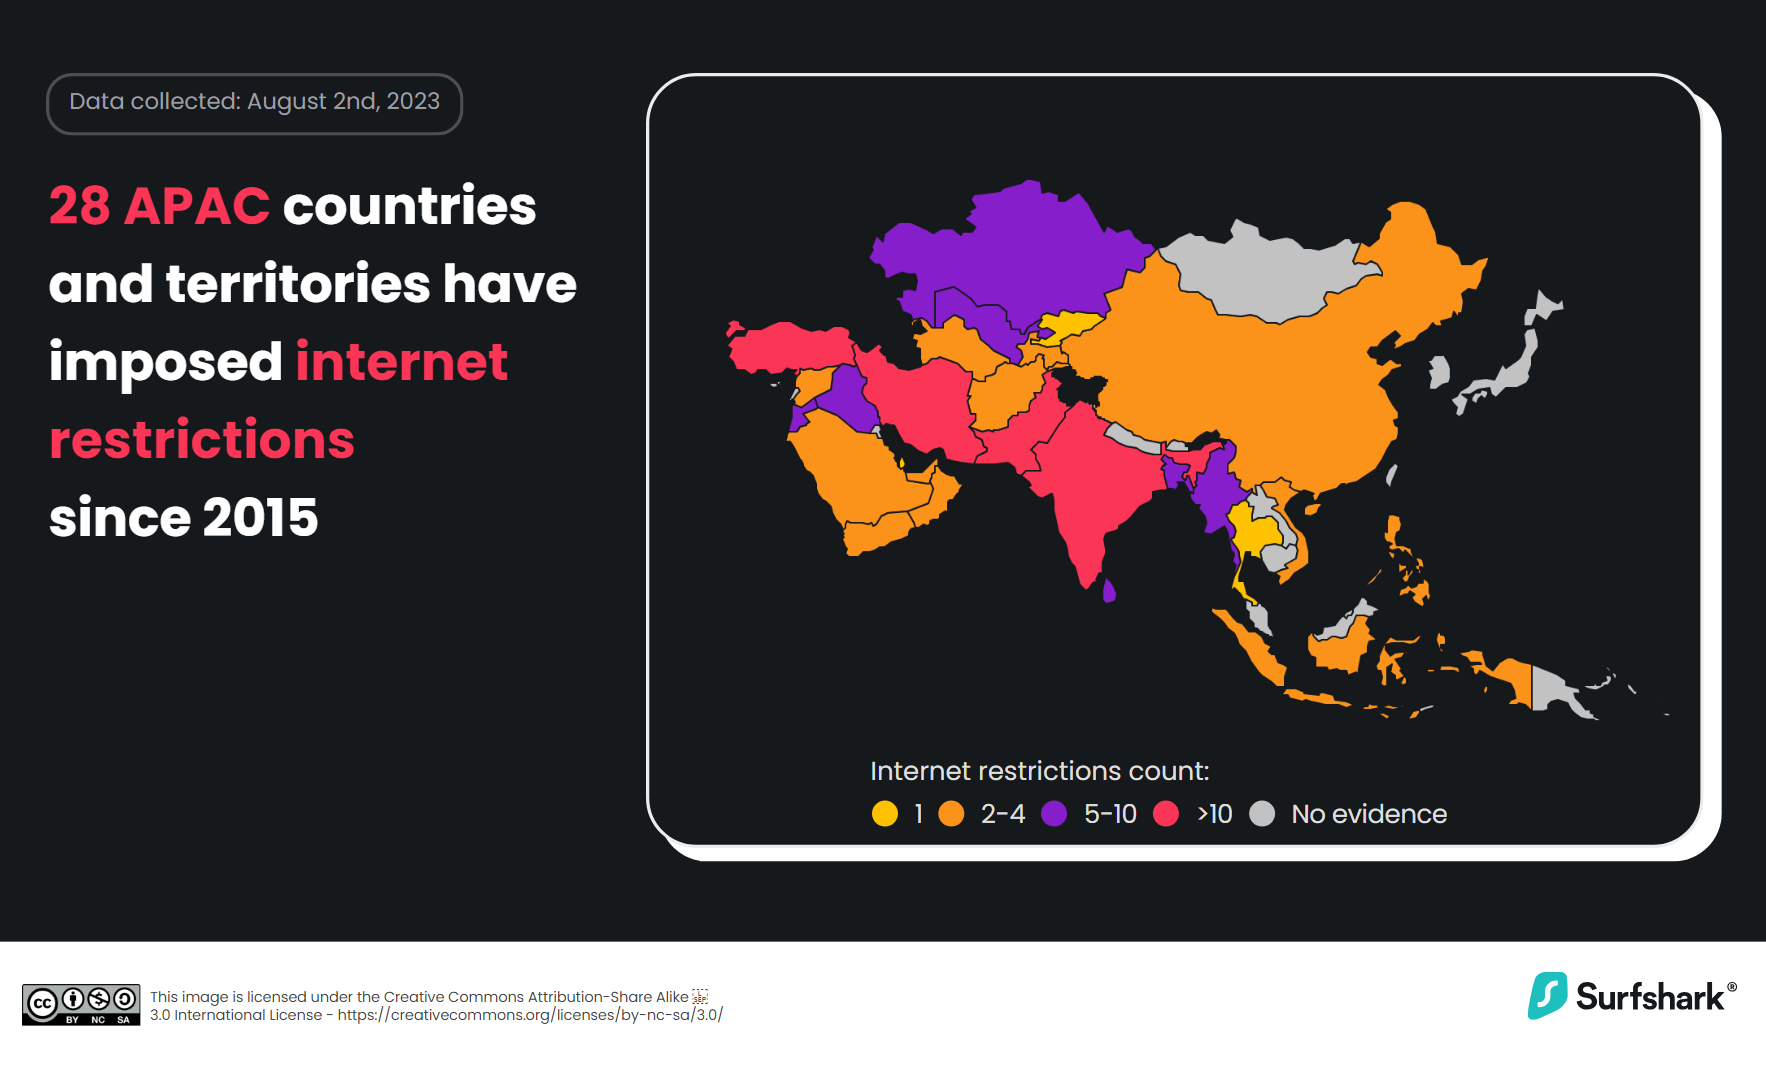 89% of the APAC population has faced internet restrictions